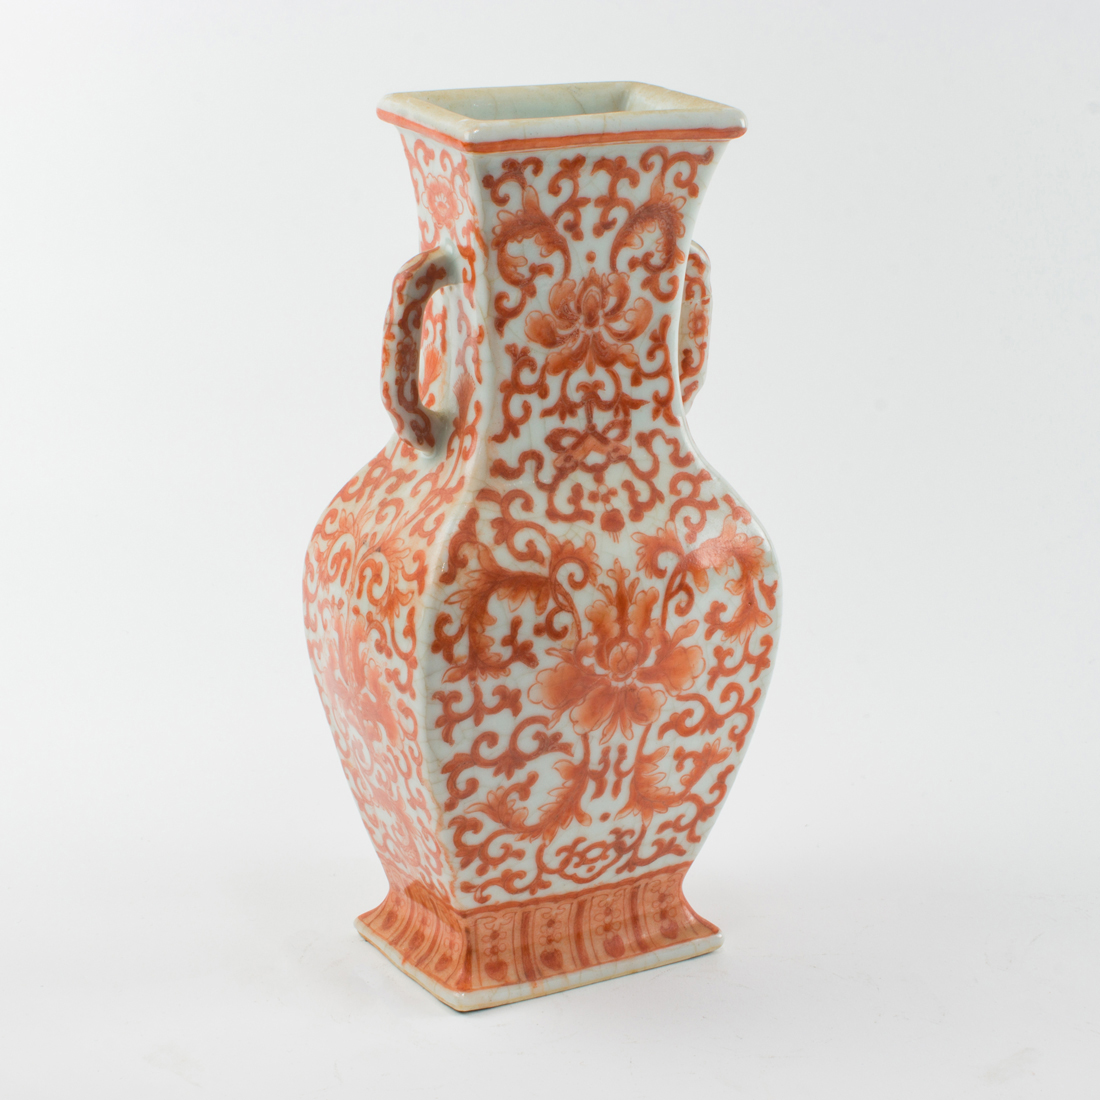 CHINESE IRON-RED-DECORATED VASE